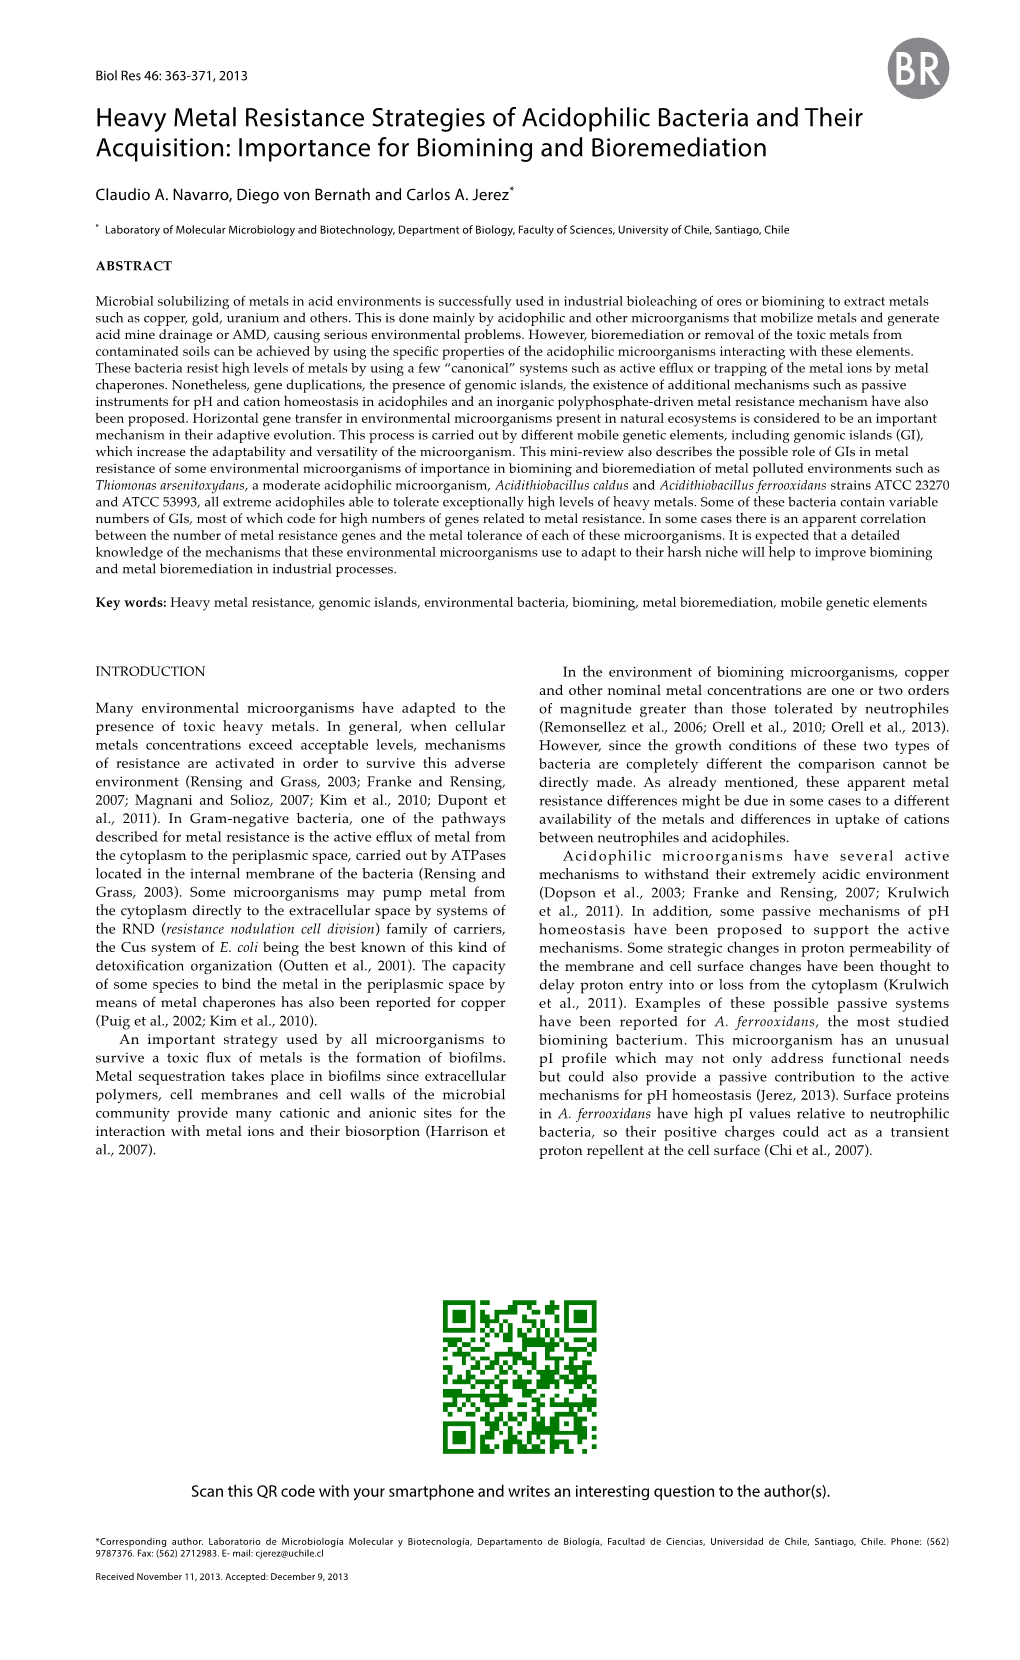 Heavy Metal Resistance Strategies of Acidophilic Bacteria and Their Acquisition: Importance for Biomining and Bioremediation